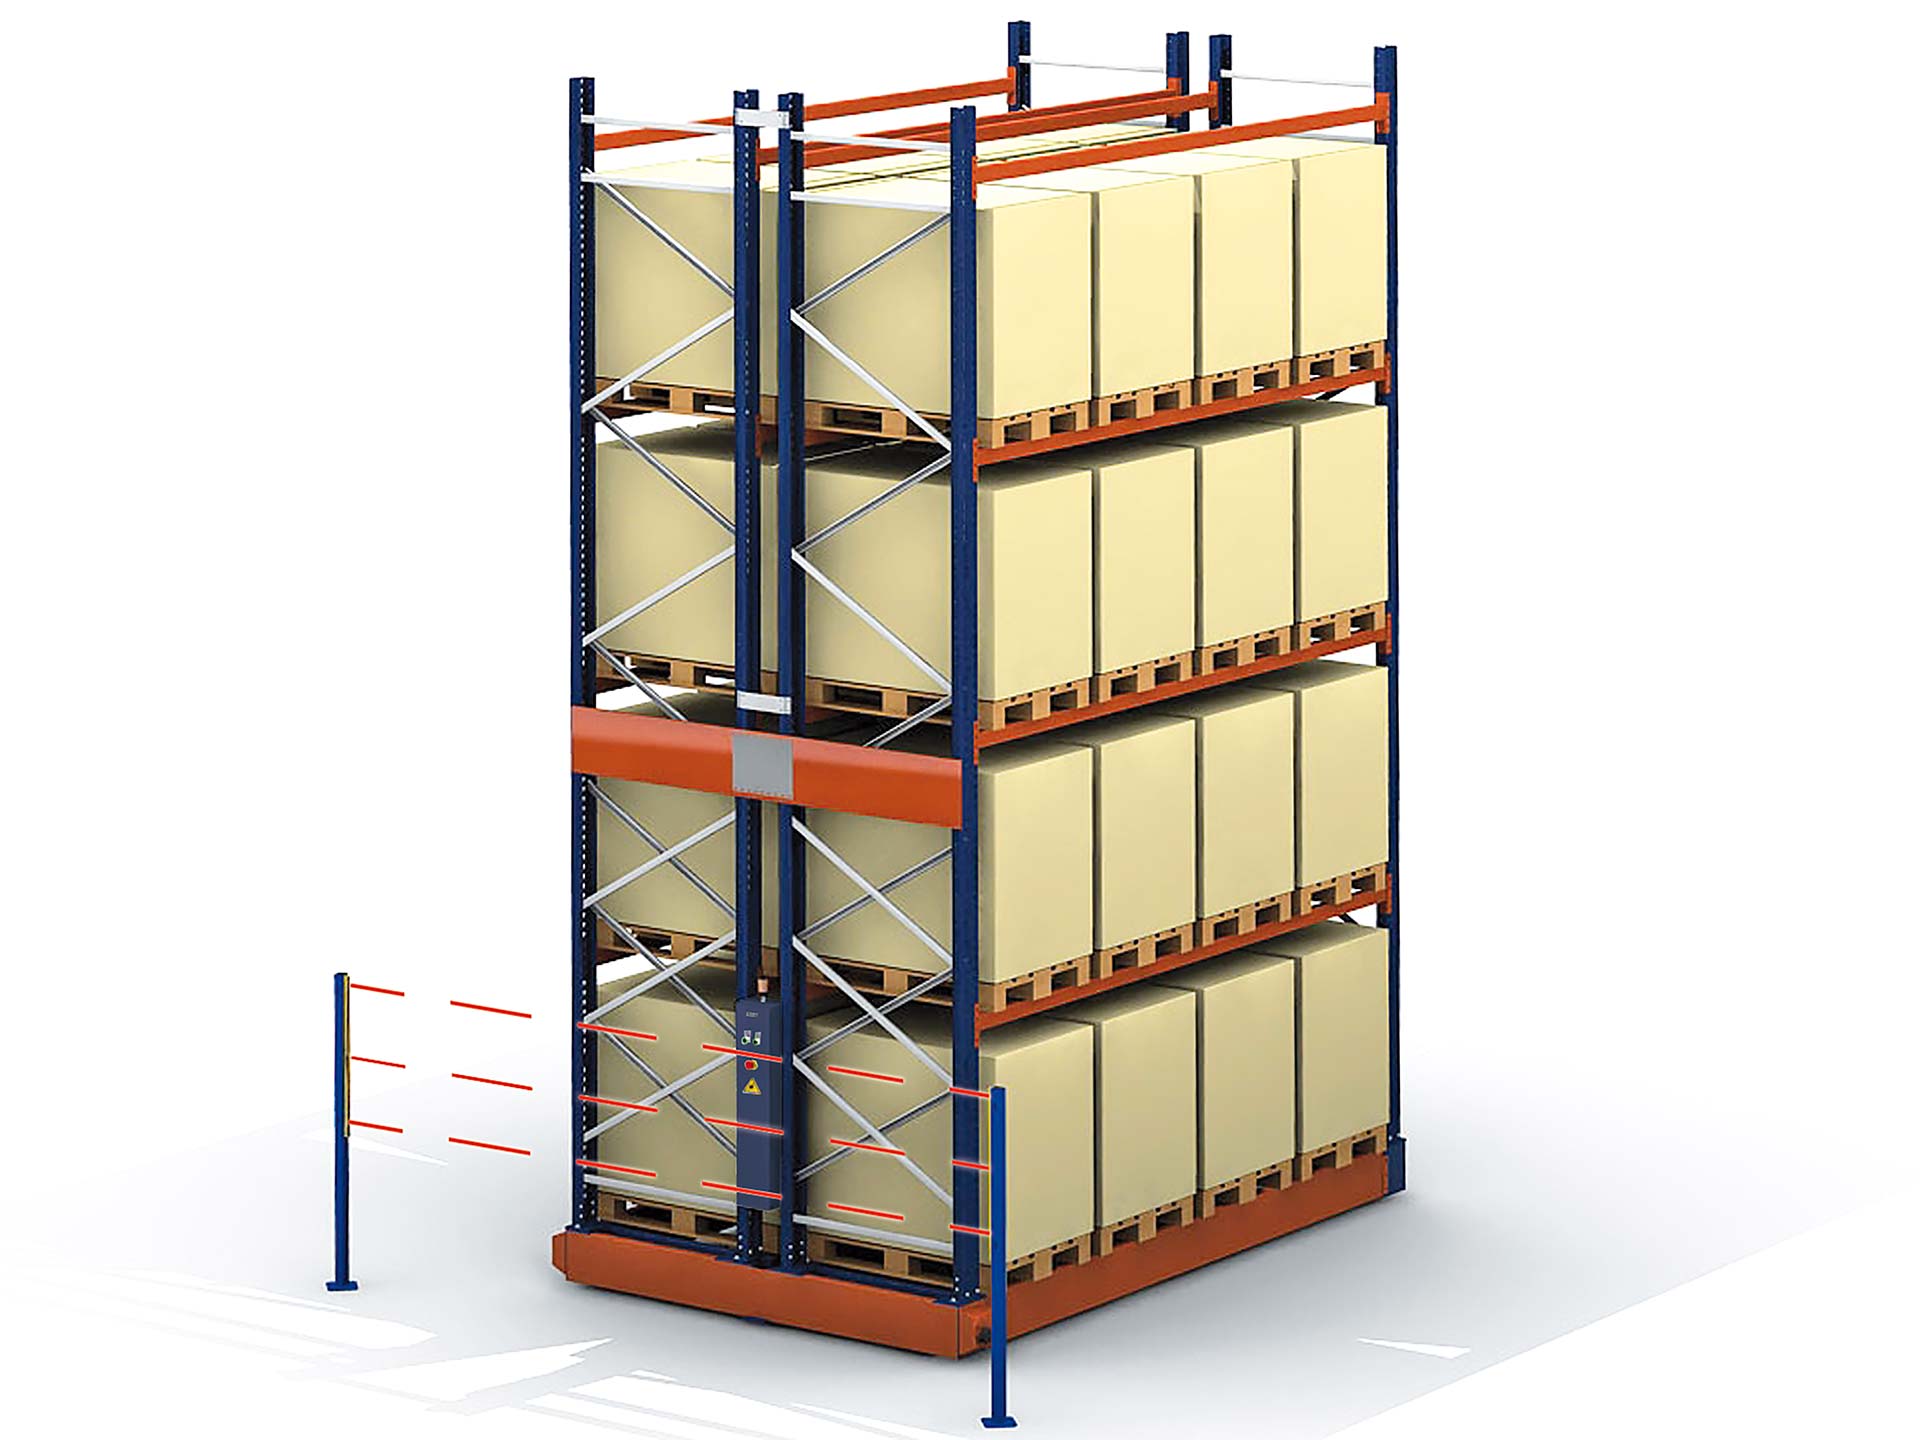 The Movirack system has an external safety barrier to prevent accidents with operators